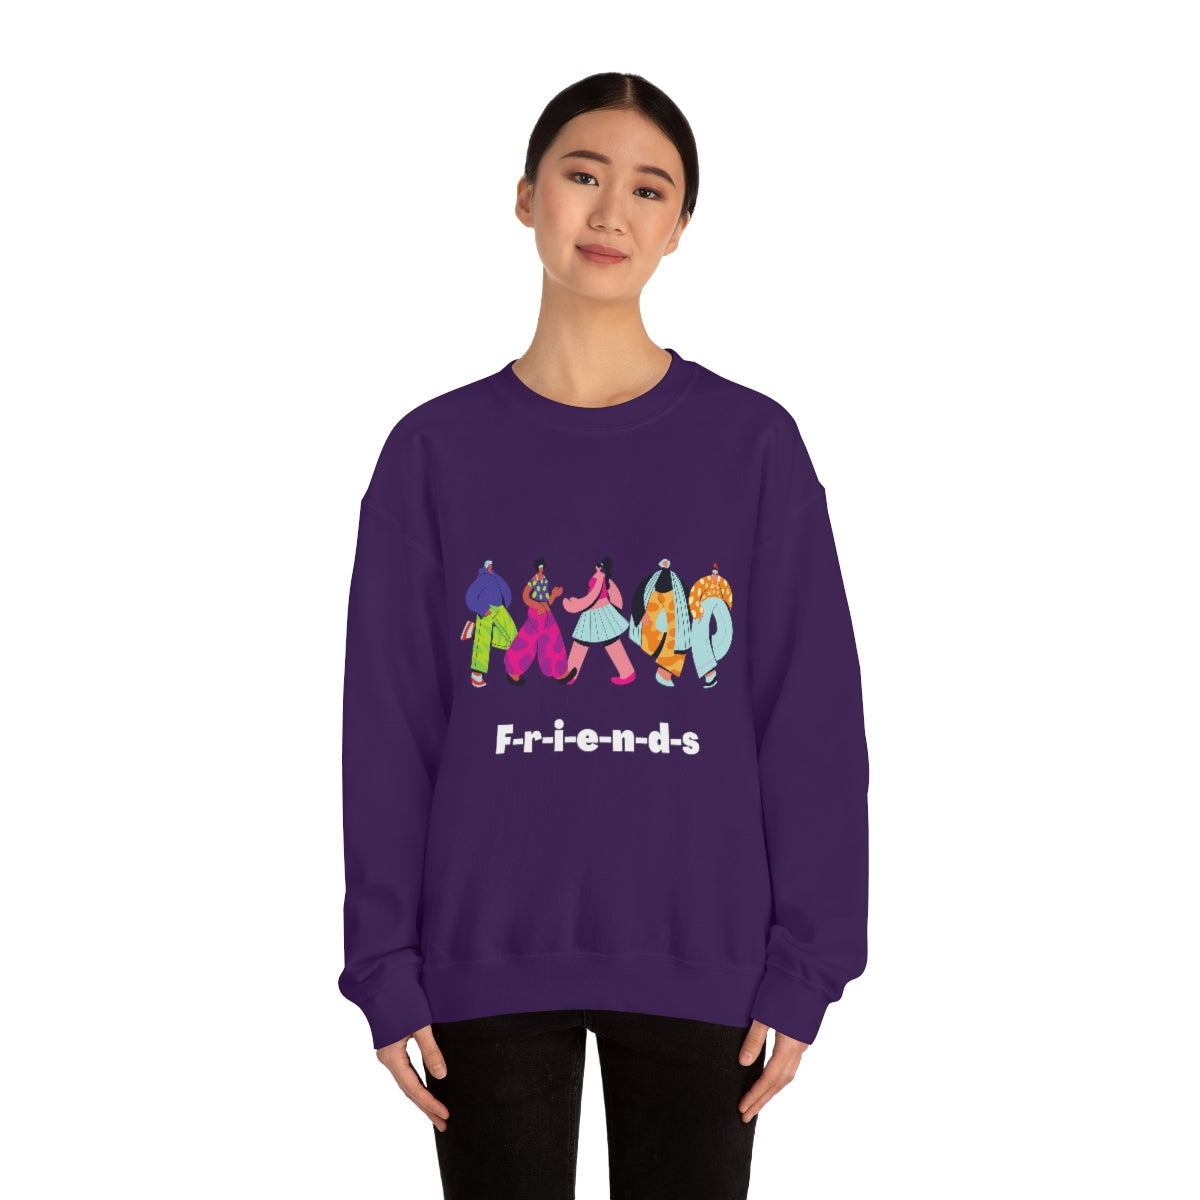 FRIENDS SWEATSHIRT, FRIENDS PARTY, FRIEND'S BIRTHDAY, GRADUATE PARTY DRESS, BRIDESMAID GIFTS, GROOMMENS GIFTS